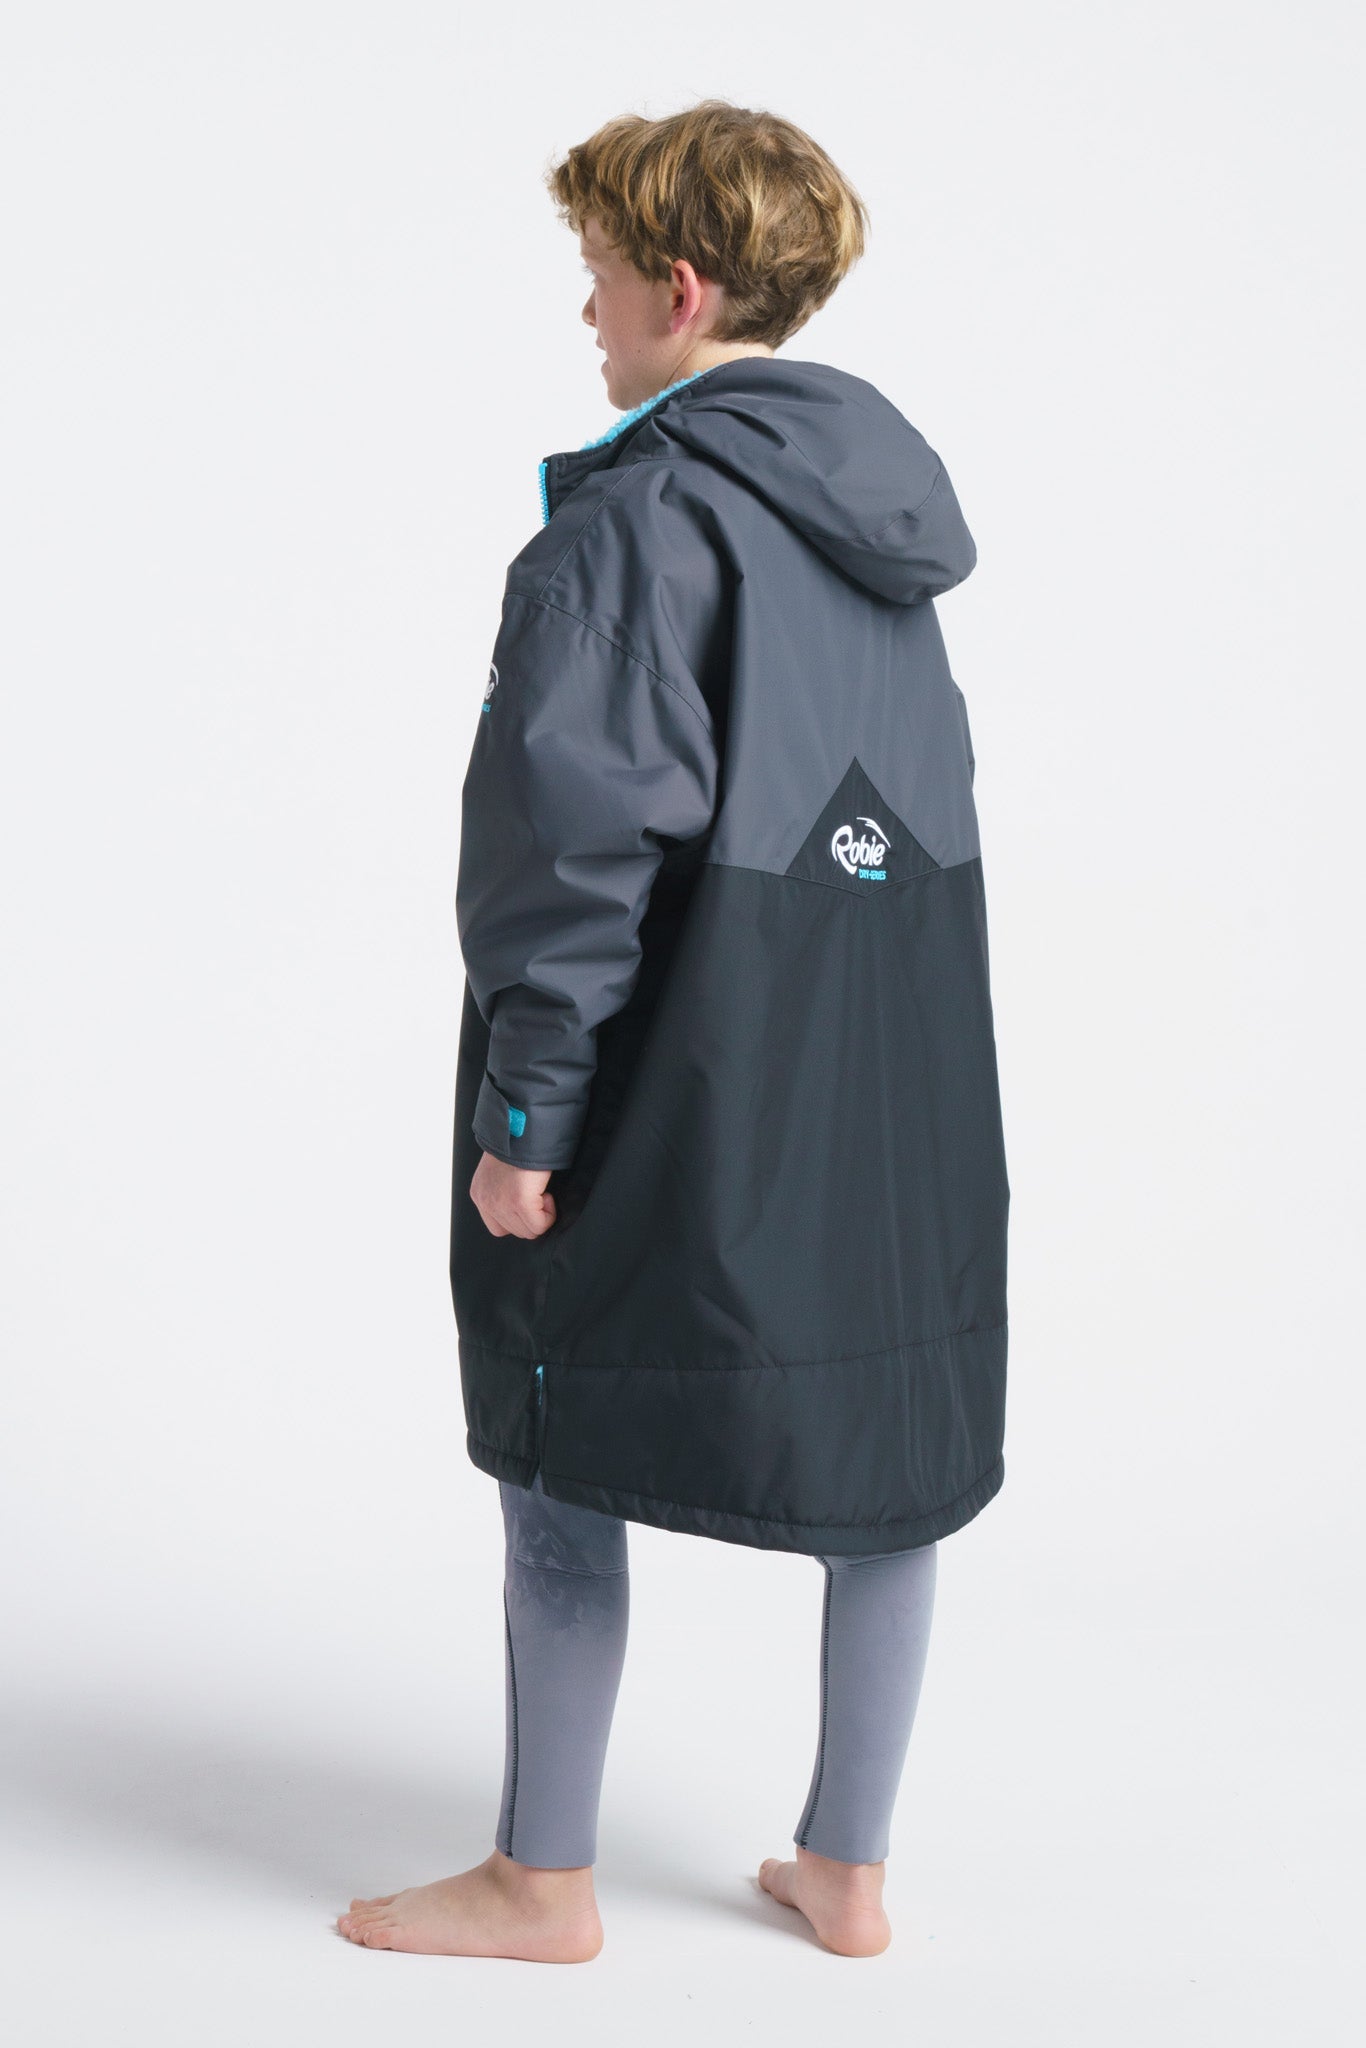 robie-robes-dry-series-changing-robe-waterproof-preorder-product-blacksheepsurfco-galway-ireland-charcoal-blue-atoll-junior2